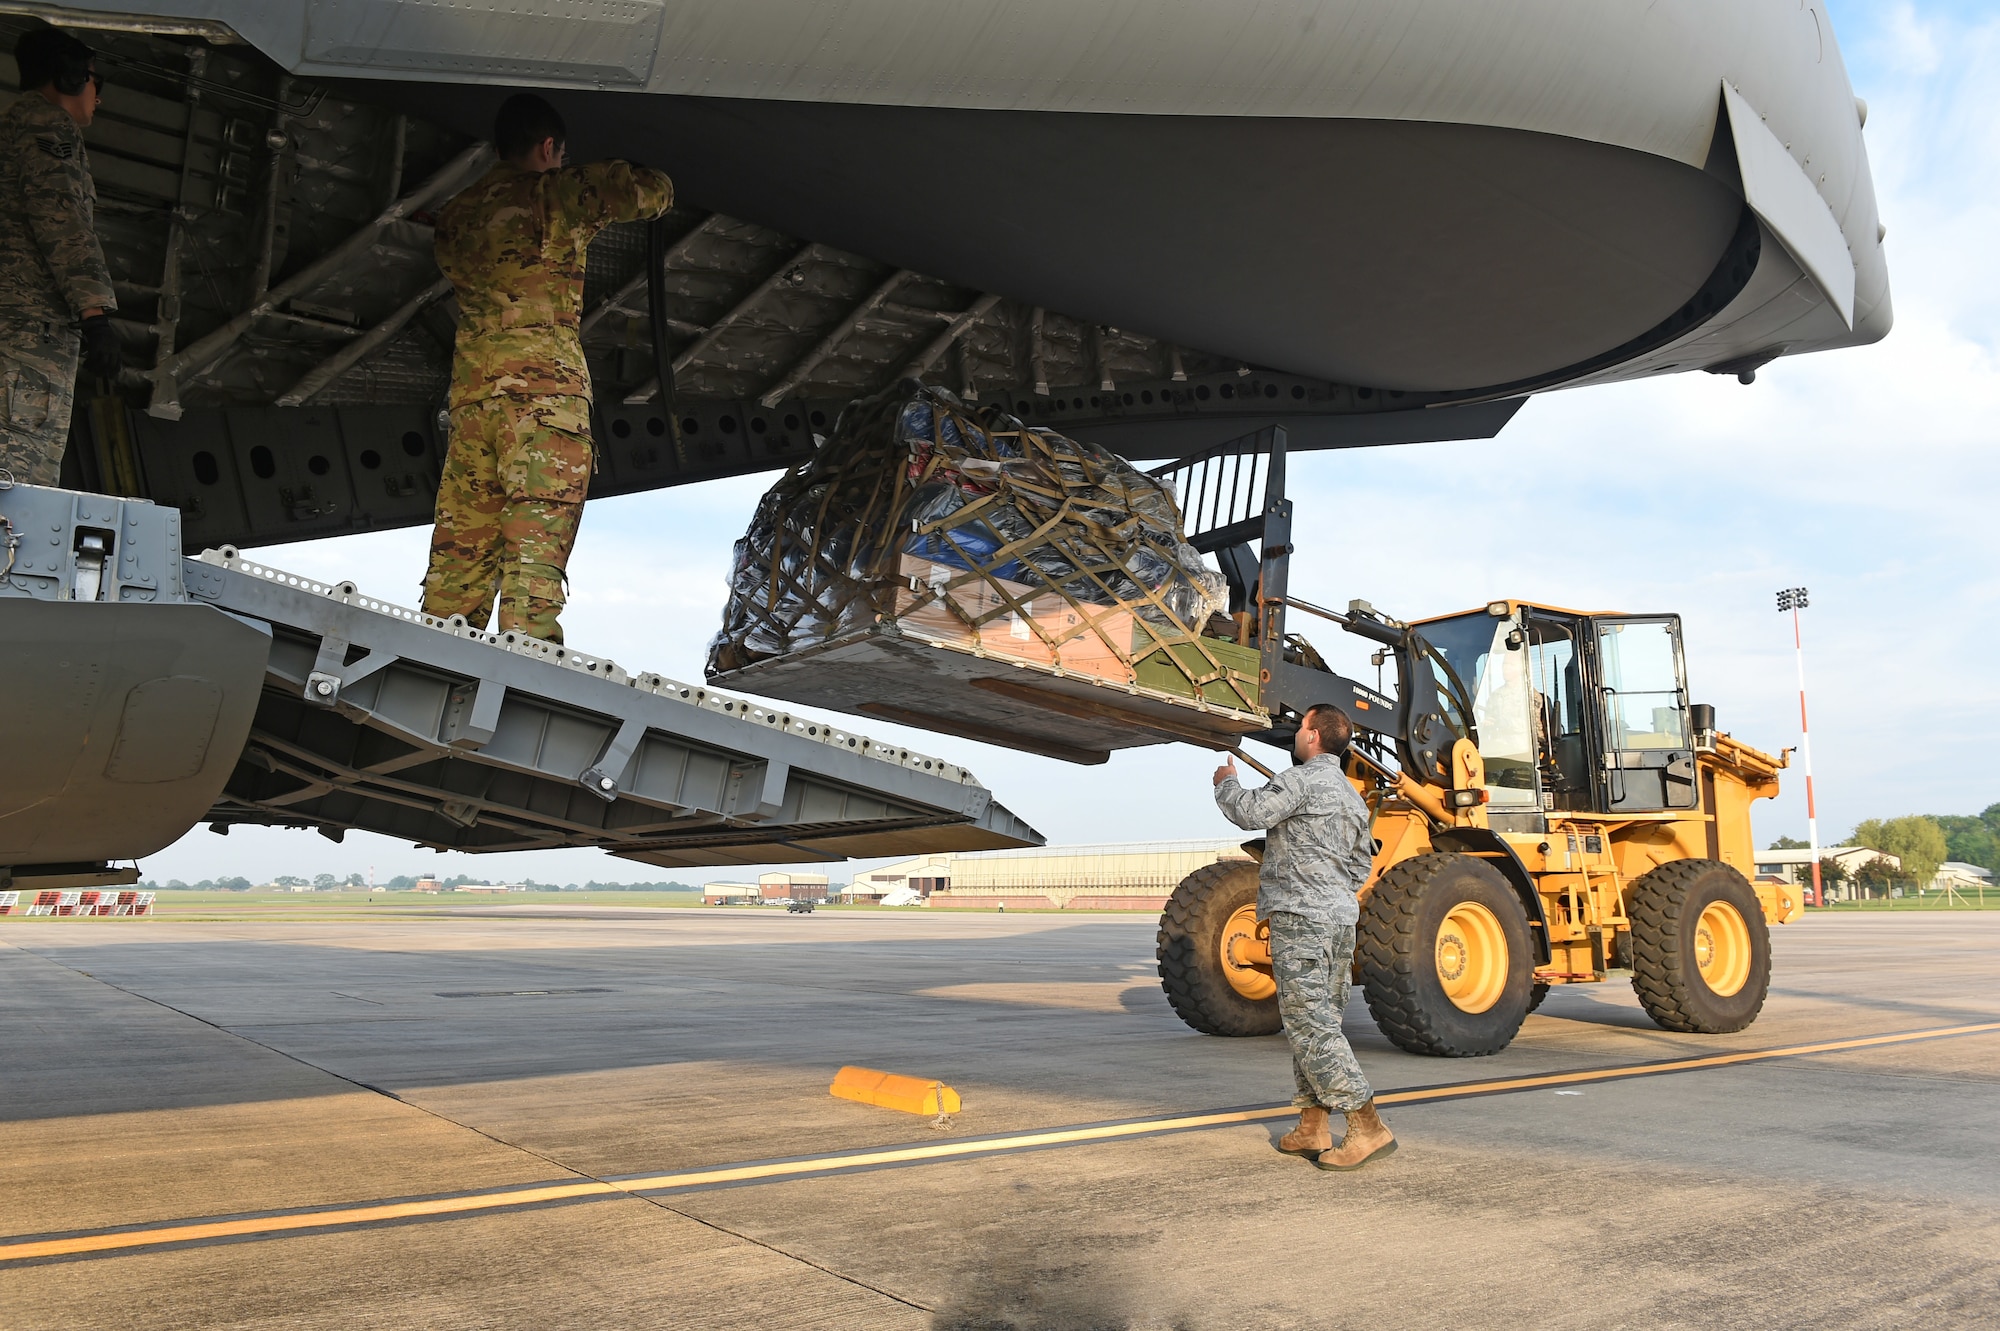 U.S. Air Force Airmen assigned to Air Mobility Command and U.S. Air Forces Europe and Air Forces Africa Command, unload cargo at RAF Fairford, U.K., from a C-17 Globemaster III assigned to Travis AFB, California, May 22, 2018. The C-17 carried approximately 60 Airmen and pallets of cargo in support of Dyess Air Force Base’s 345th Expeditionary Bomb Squadron’s assurance and deterrence missions in Europe. (U.S. Air Force photo by Senior Airman Emily Copeland)